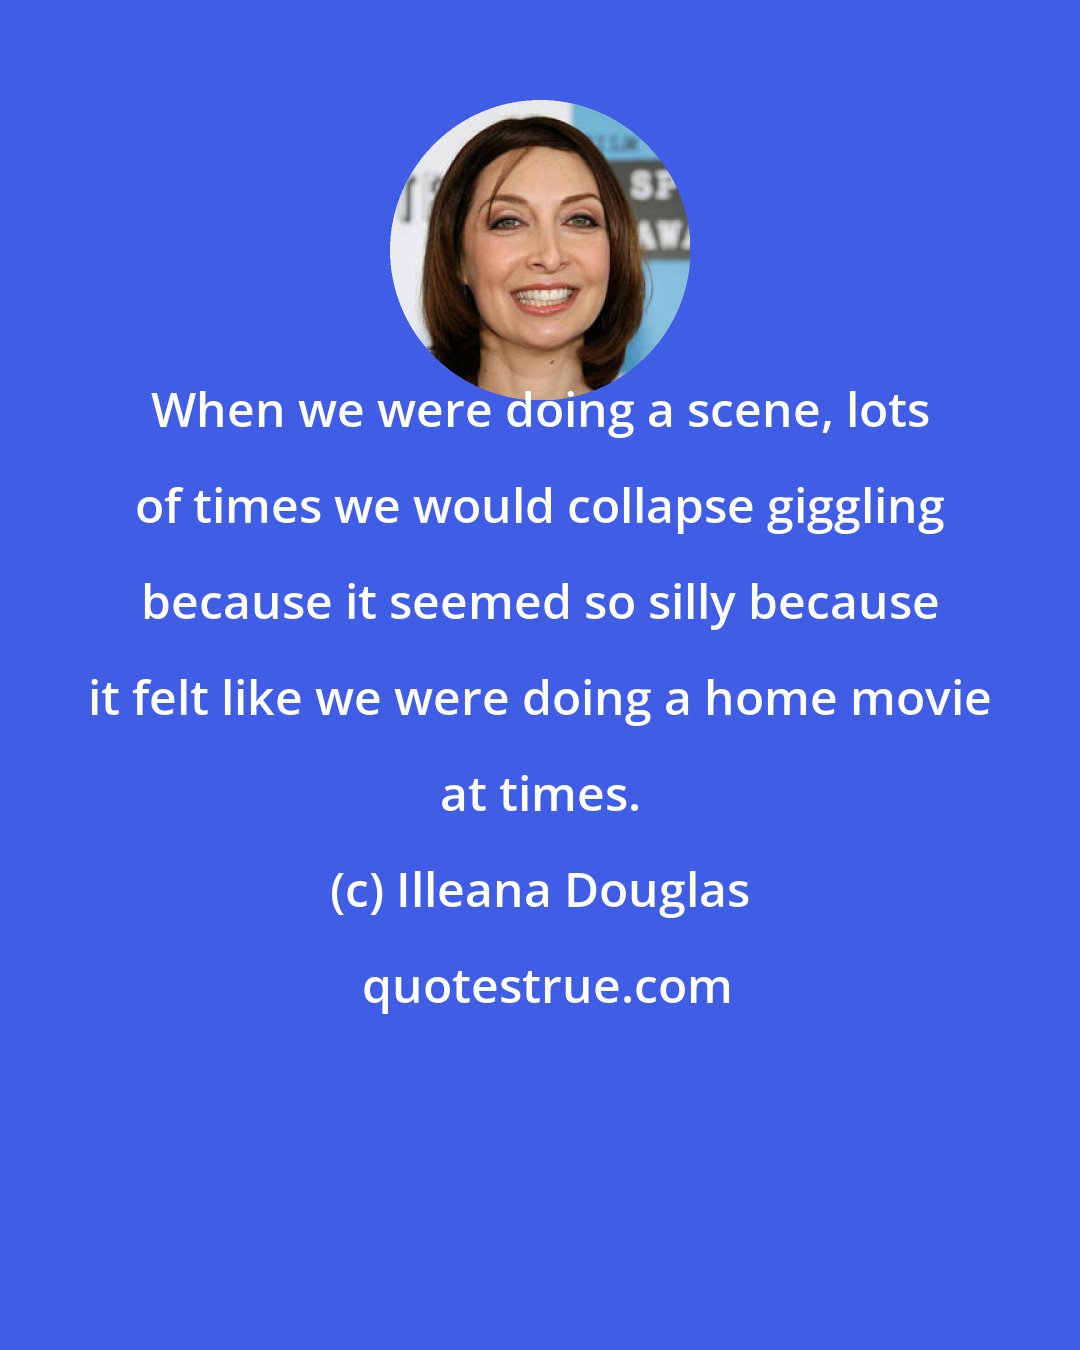 Illeana Douglas: When we were doing a scene, lots of times we would collapse giggling because it seemed so silly because it felt like we were doing a home movie at times.